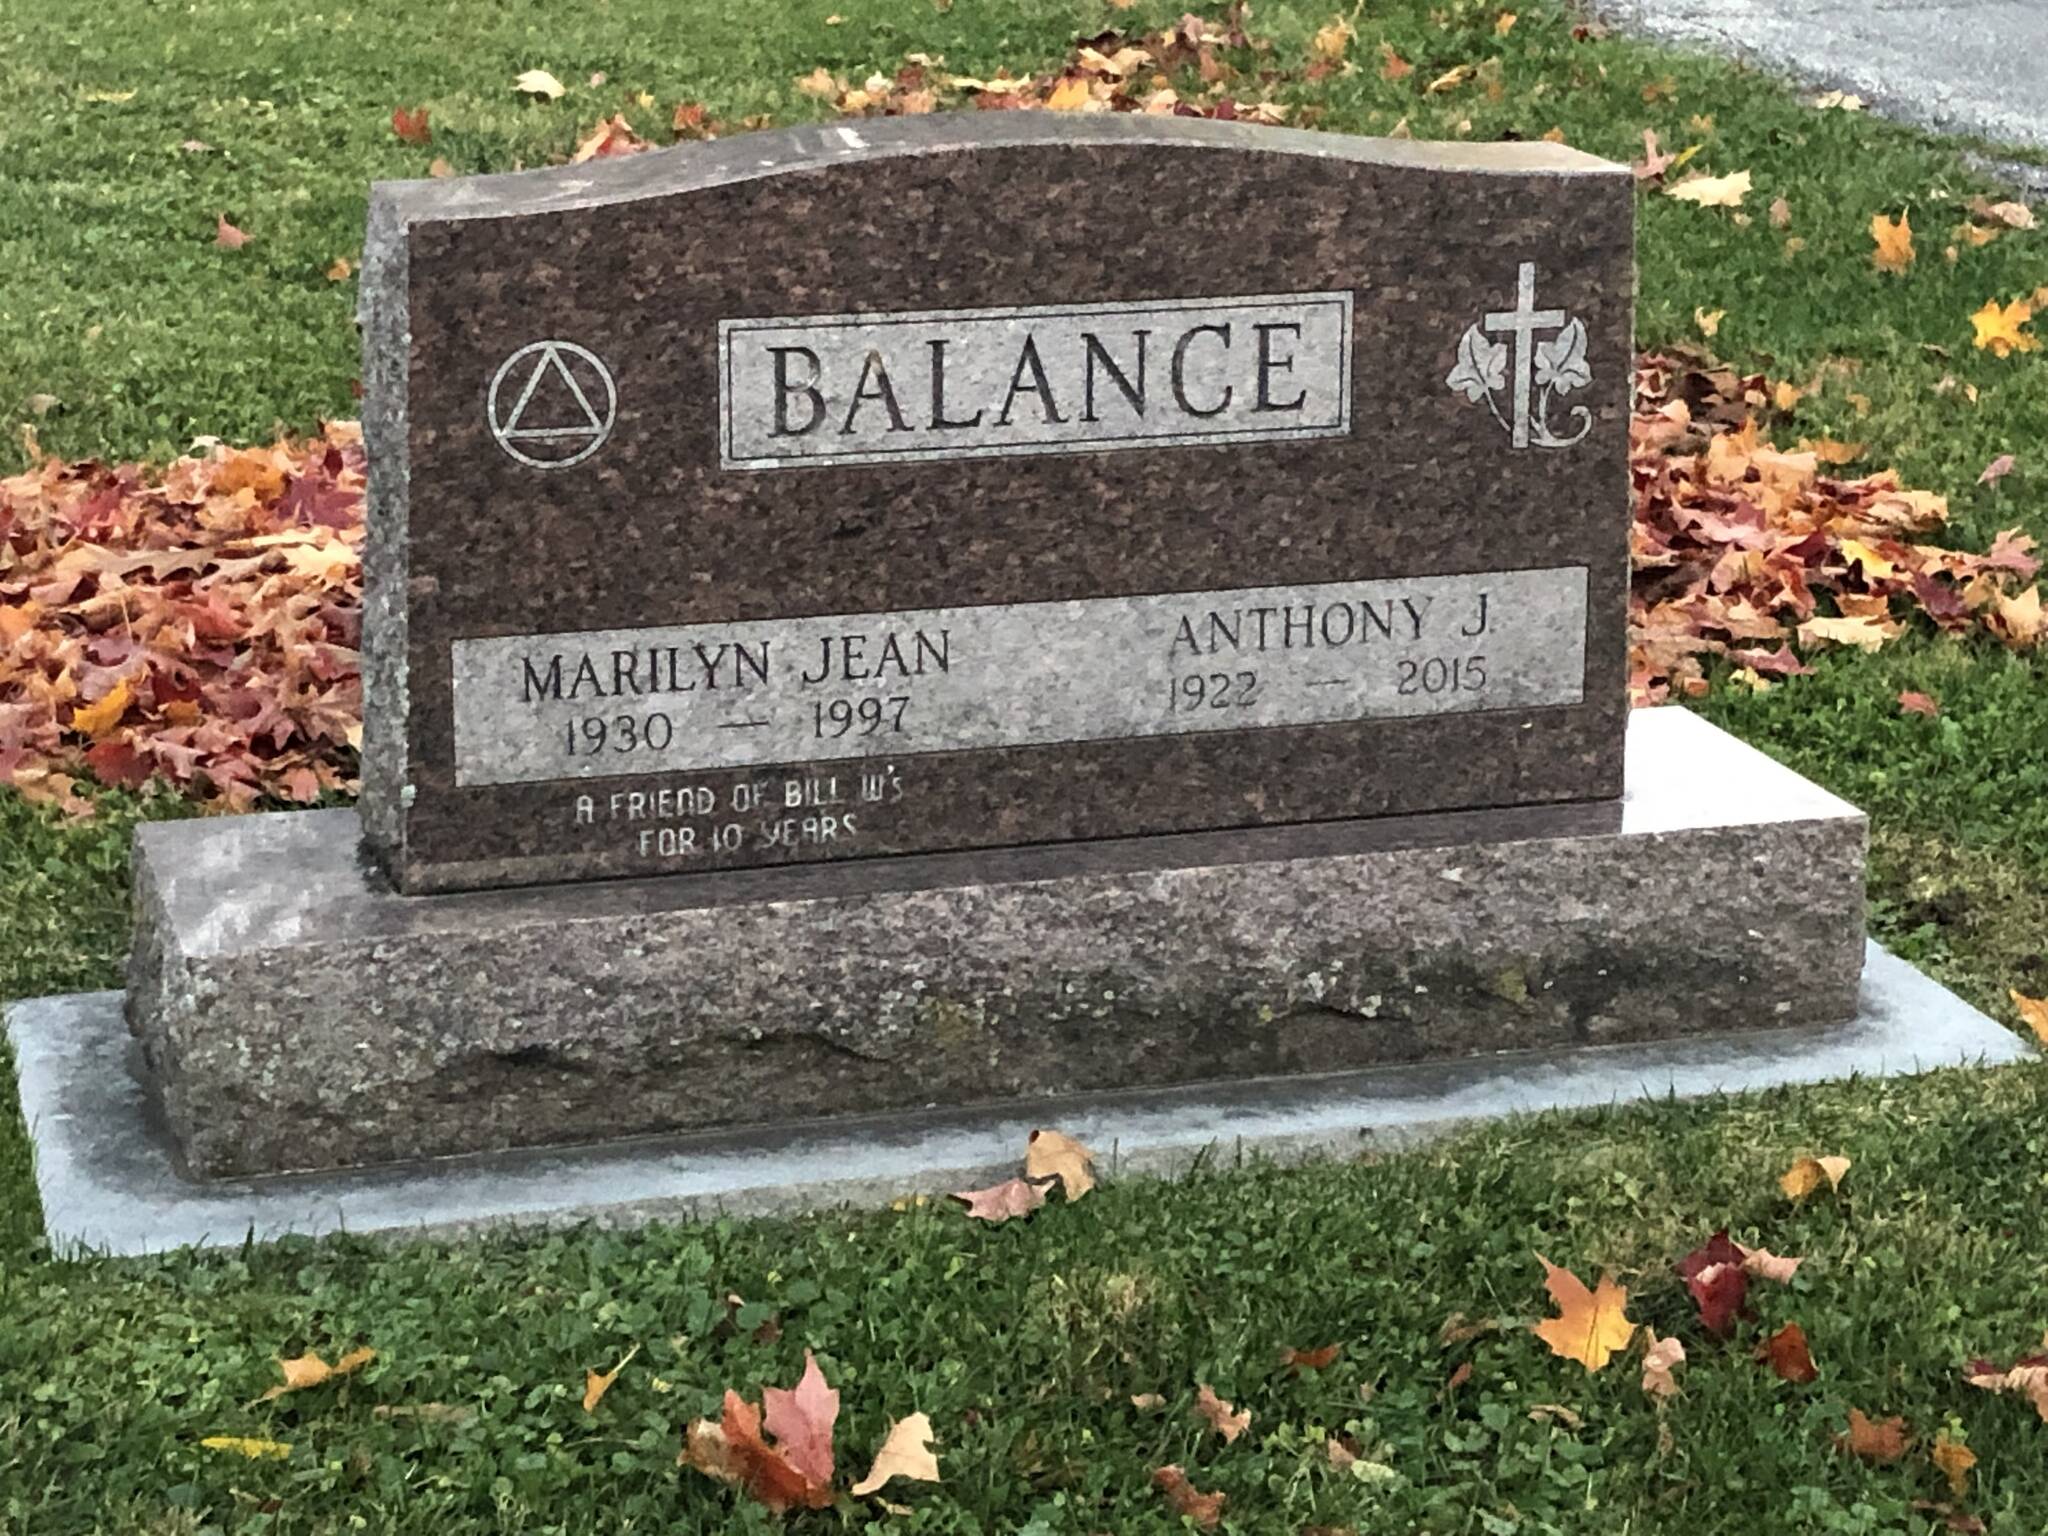 Earlier this fall, this tombstone captured my attention. It marked the final resting place for a family by the name of Balance. (Courtesy photo)